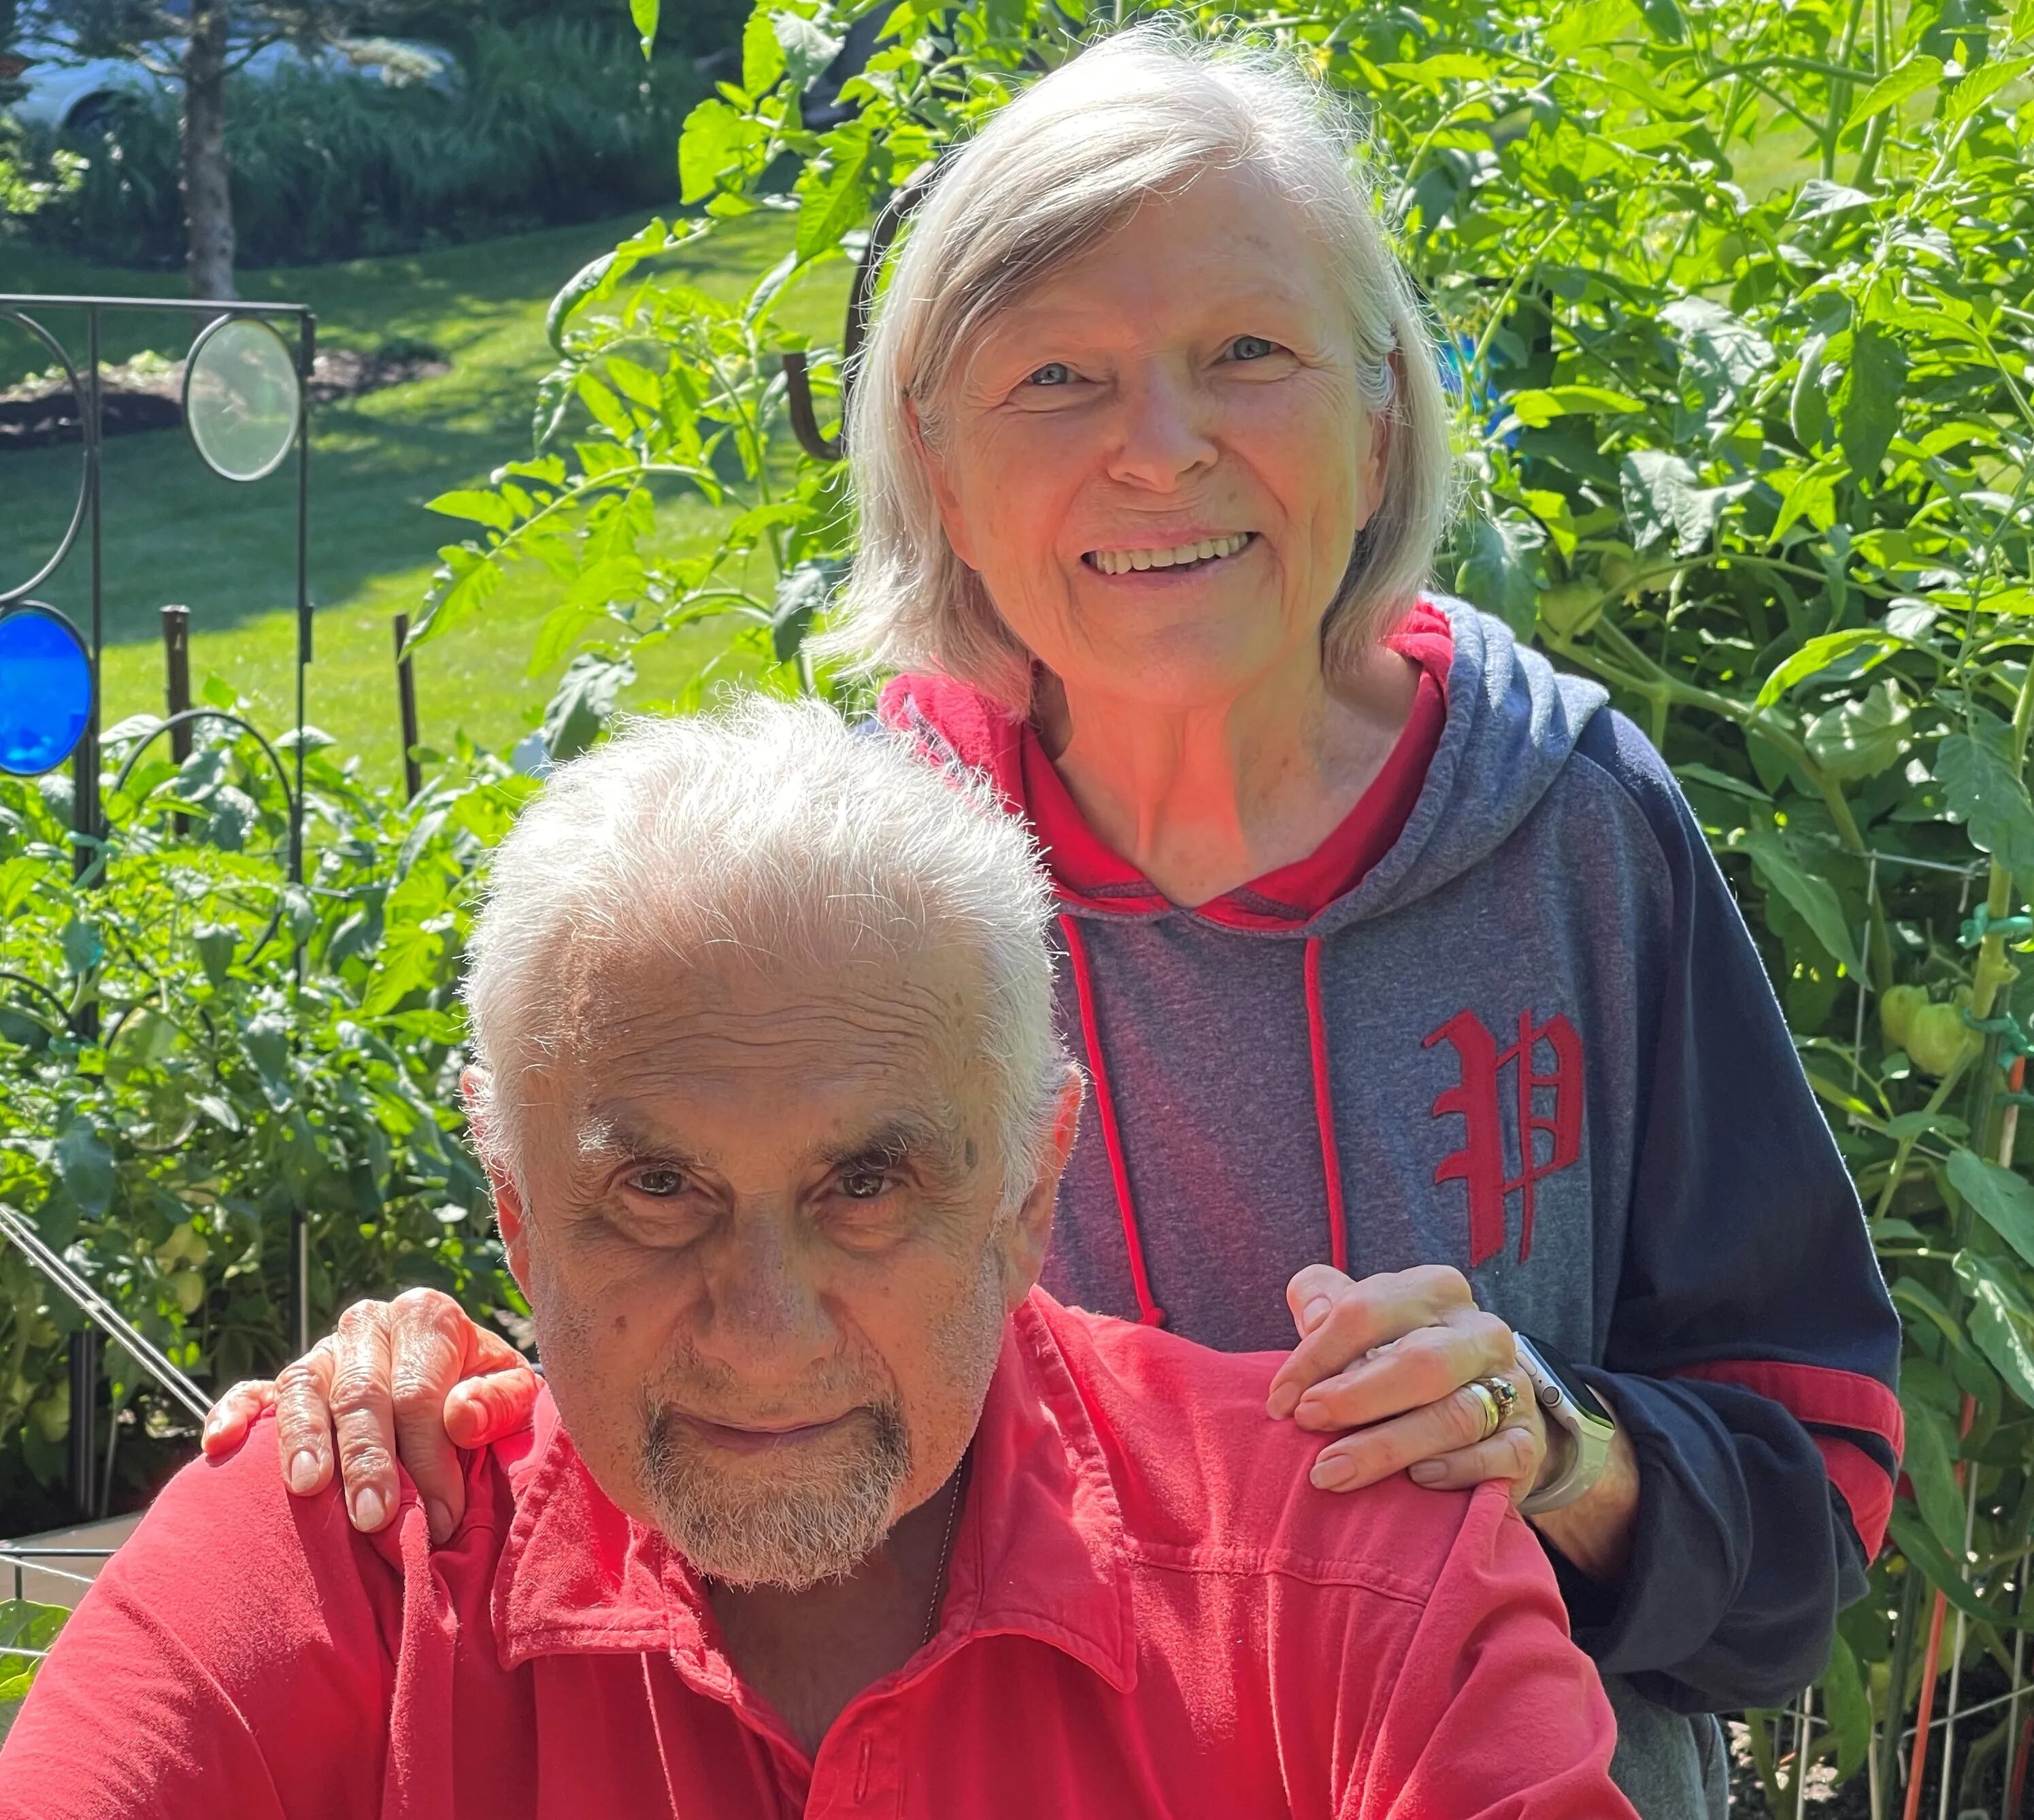 Dr. DeCosmo and his wife, Arlene, were married for 40 years and traveled often to Italy.